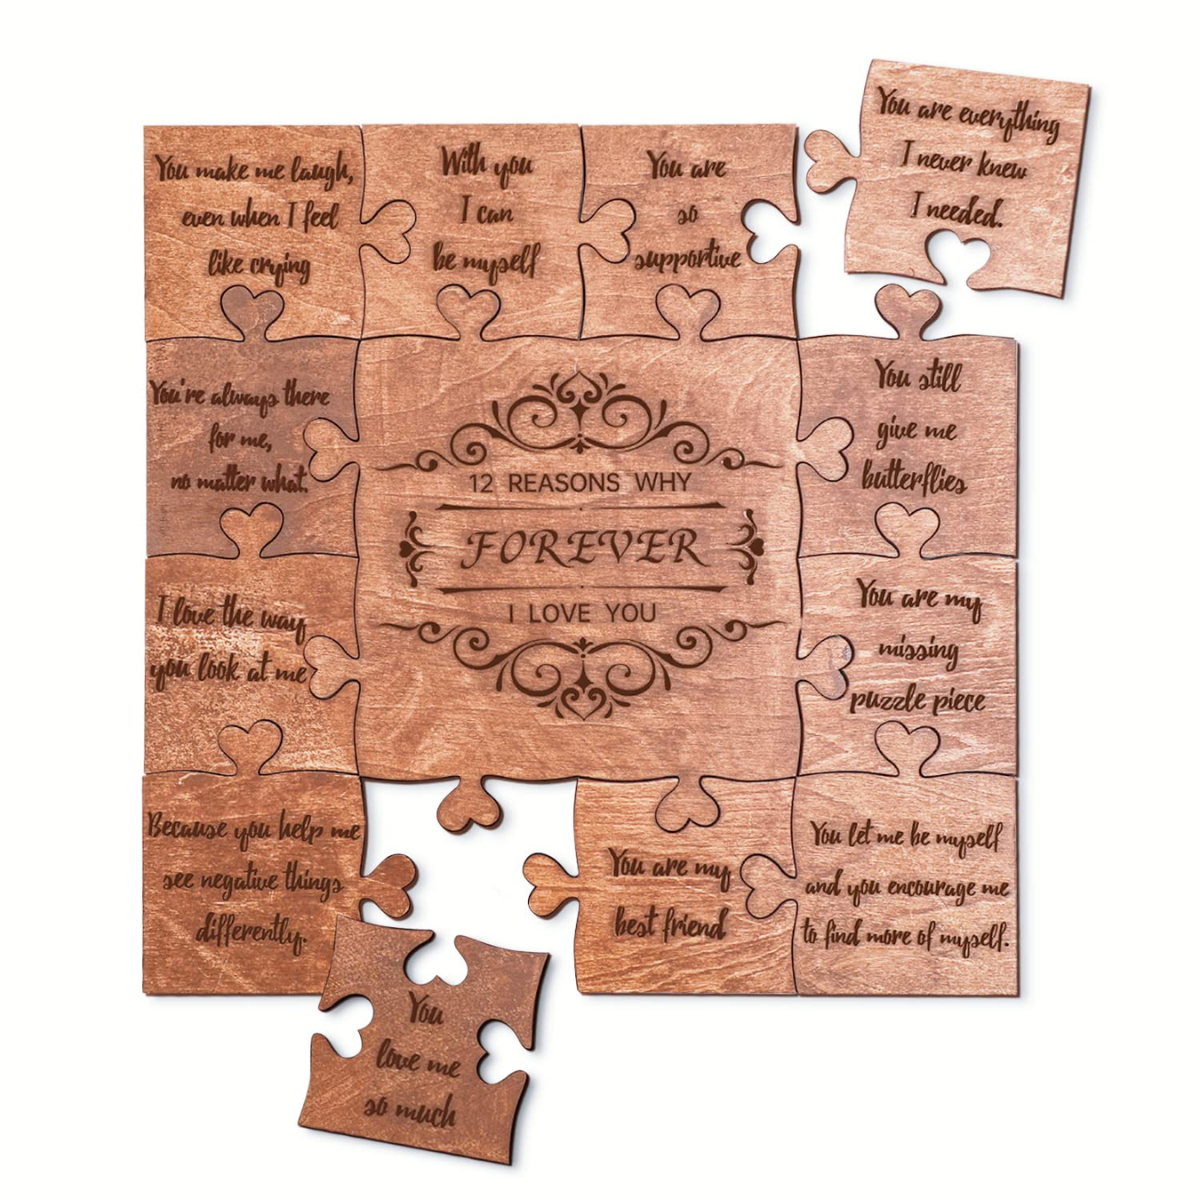 28. Piece Together Your Love Story with a Personalized Anniversary Puzzle